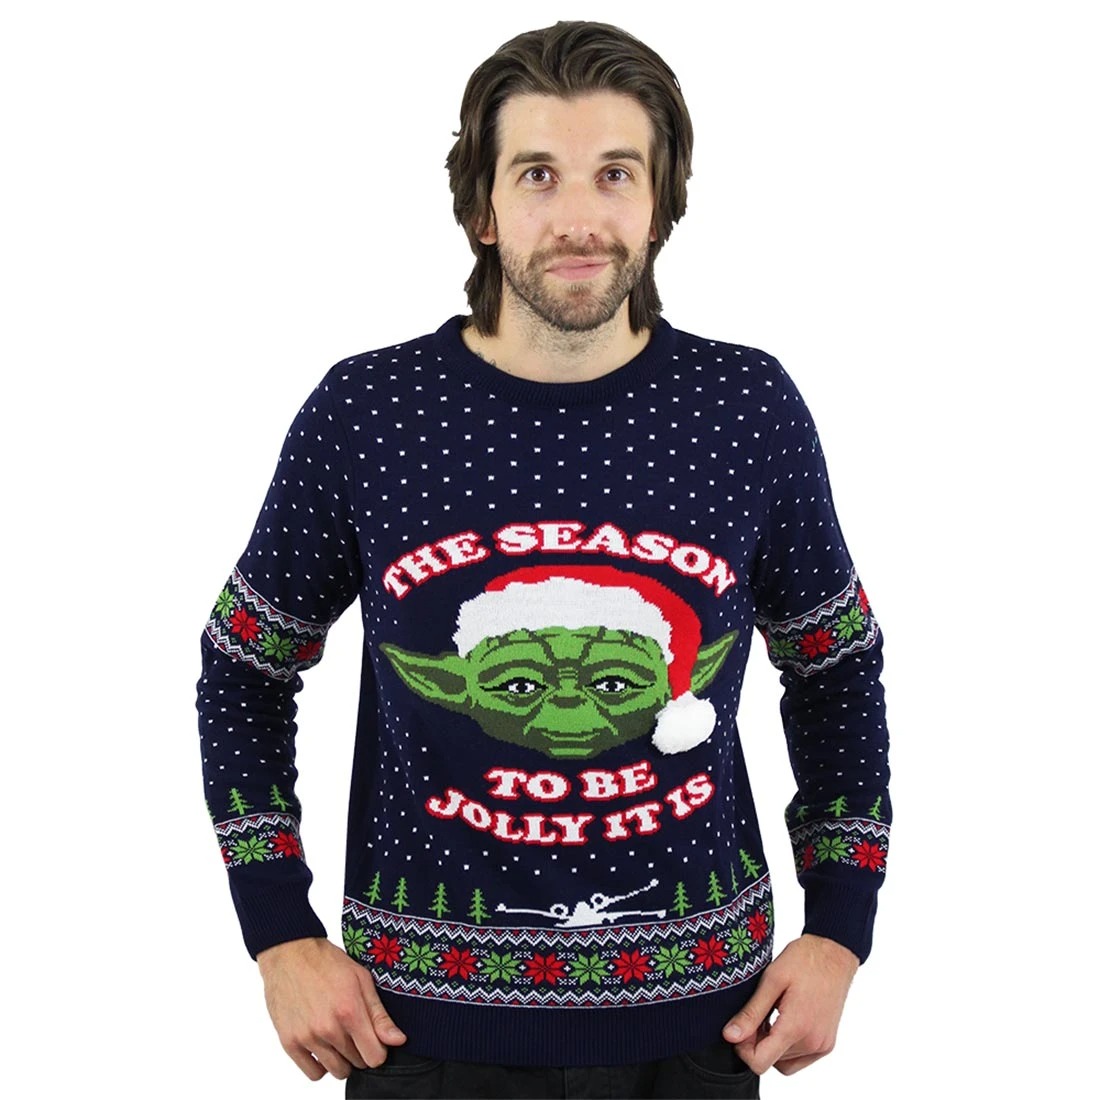 Master yoda the season to be jolly it is christmas jumper and ugly sweater size L